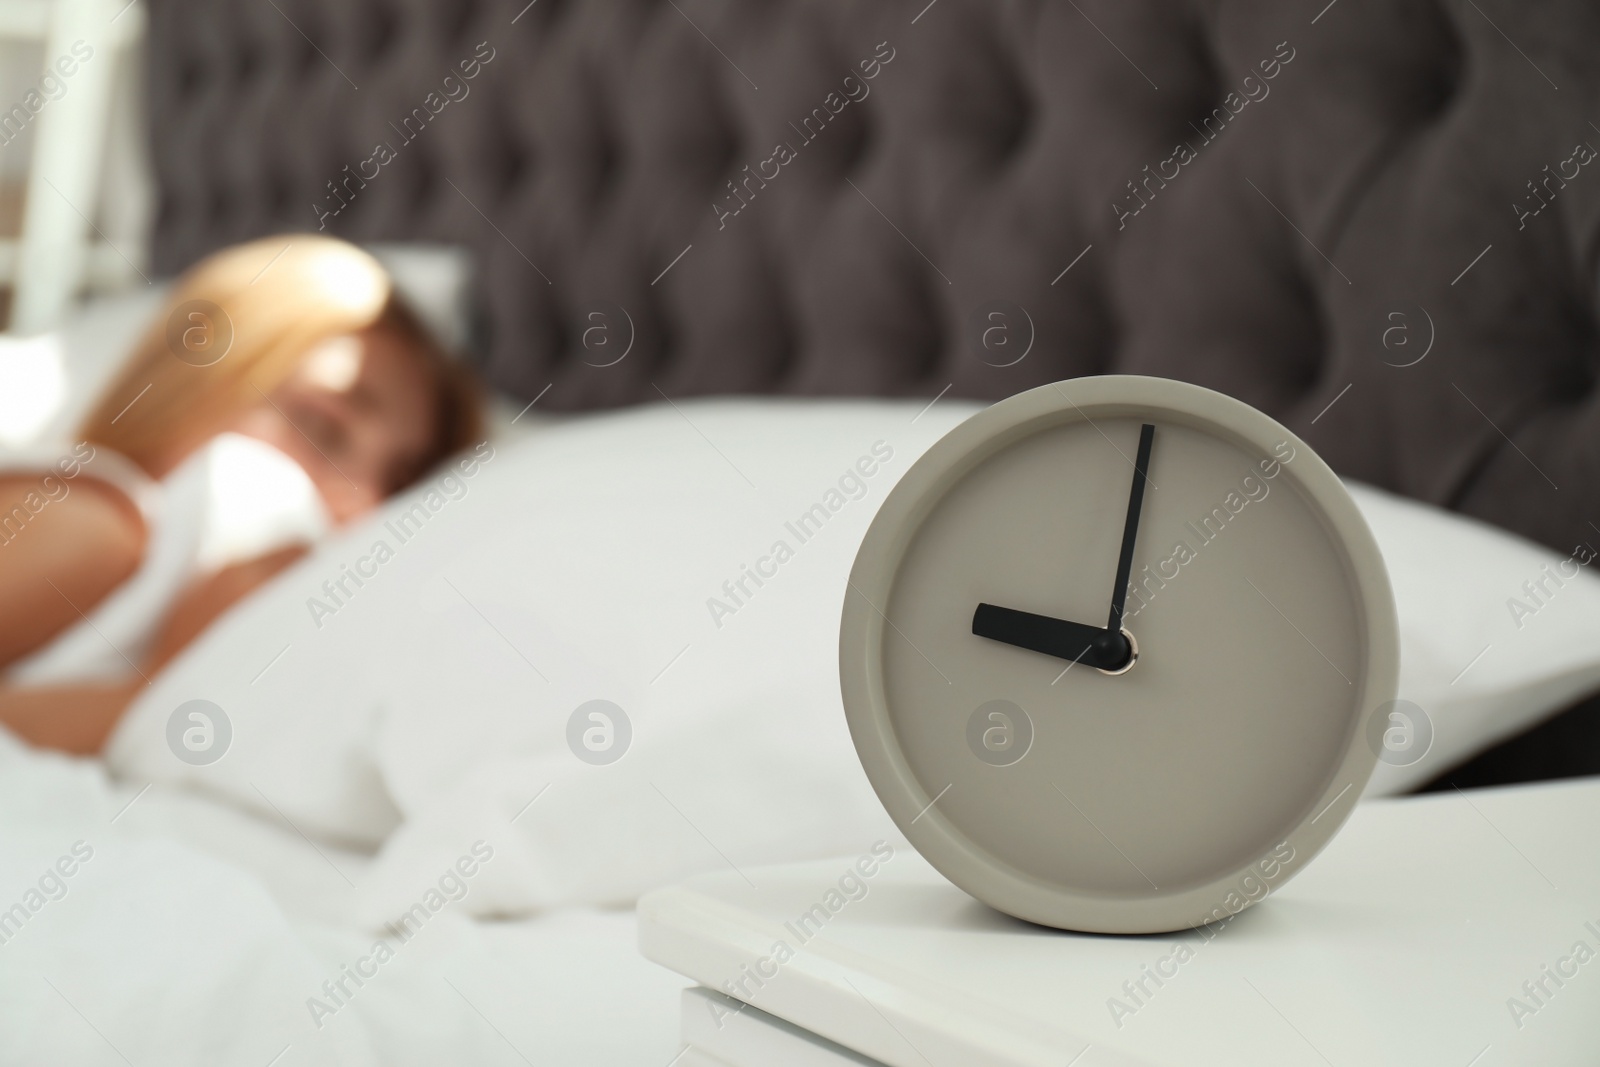 Photo of Analog alarm clock and blurred sleepy woman on background. Time of day